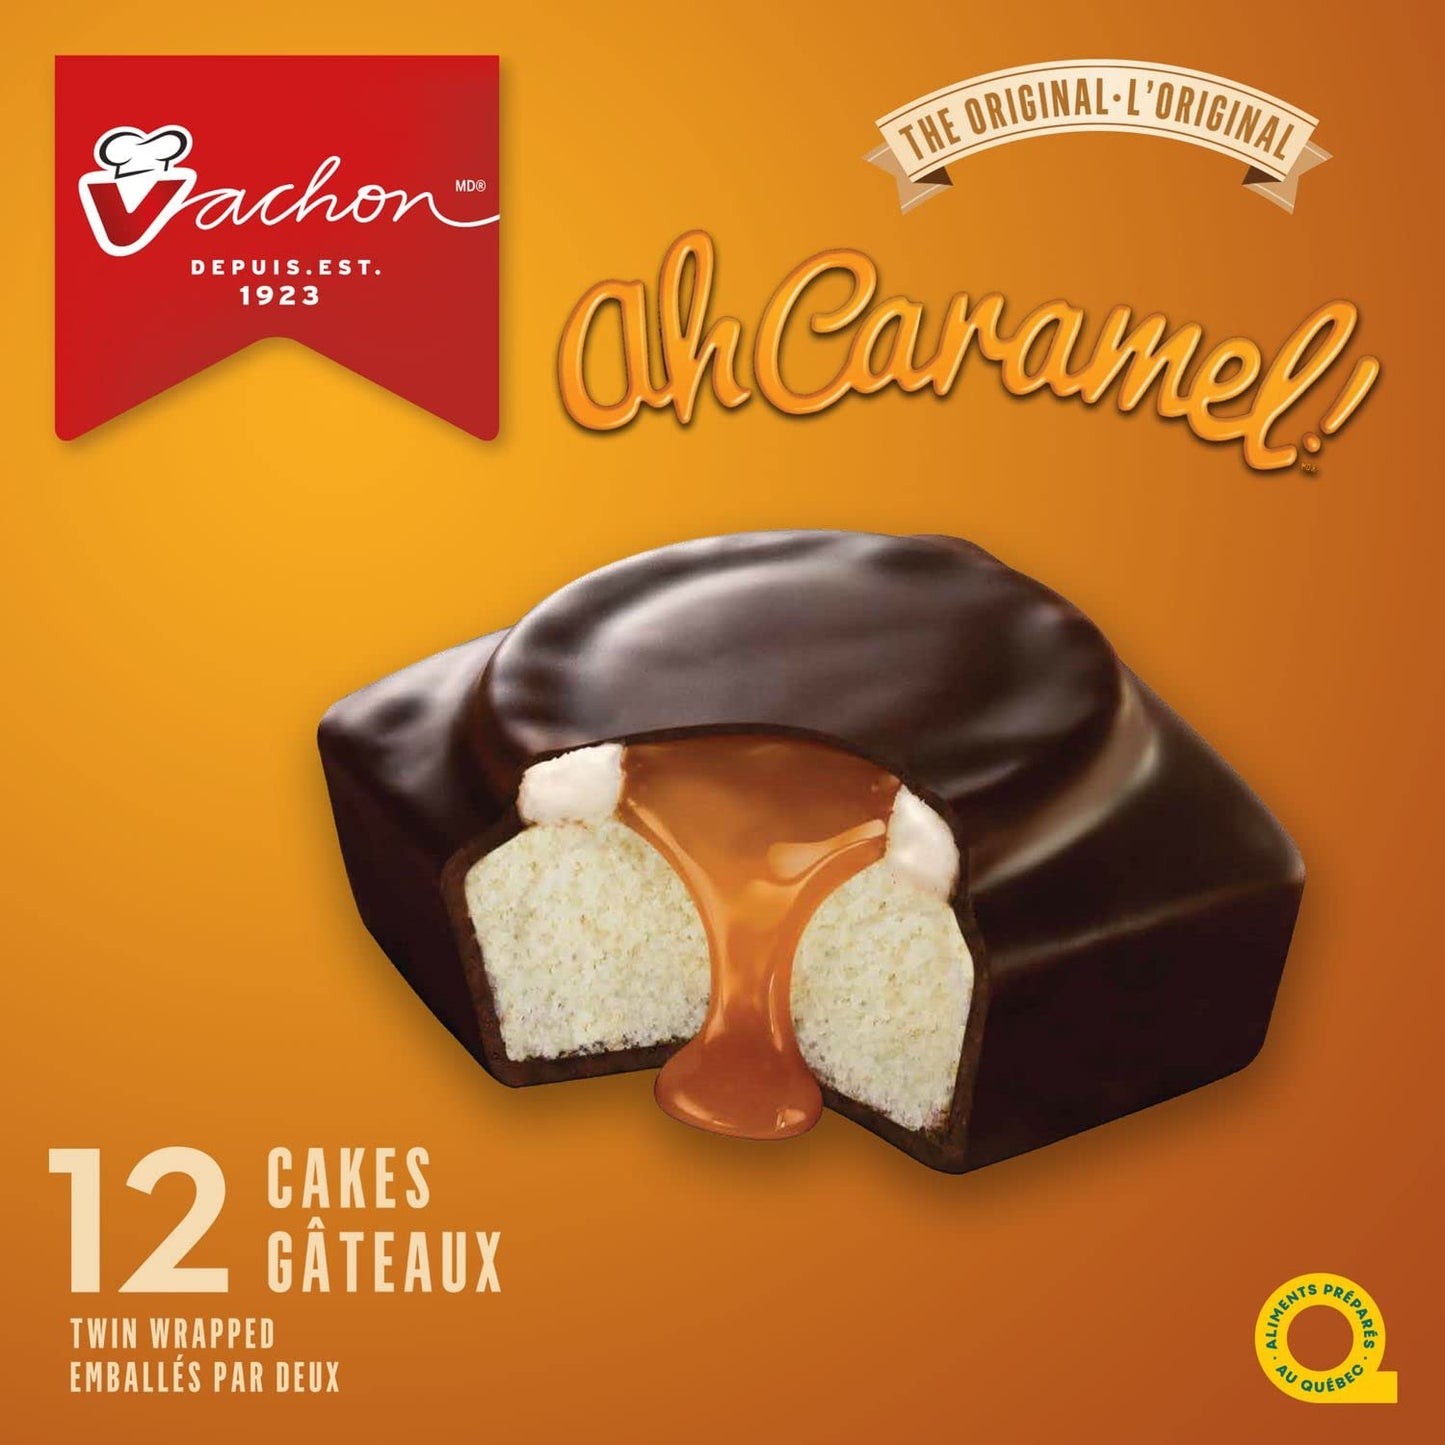 Vachon Ah Caramel Snack Cakes 336g/11.8oz (Shipped from Canada)